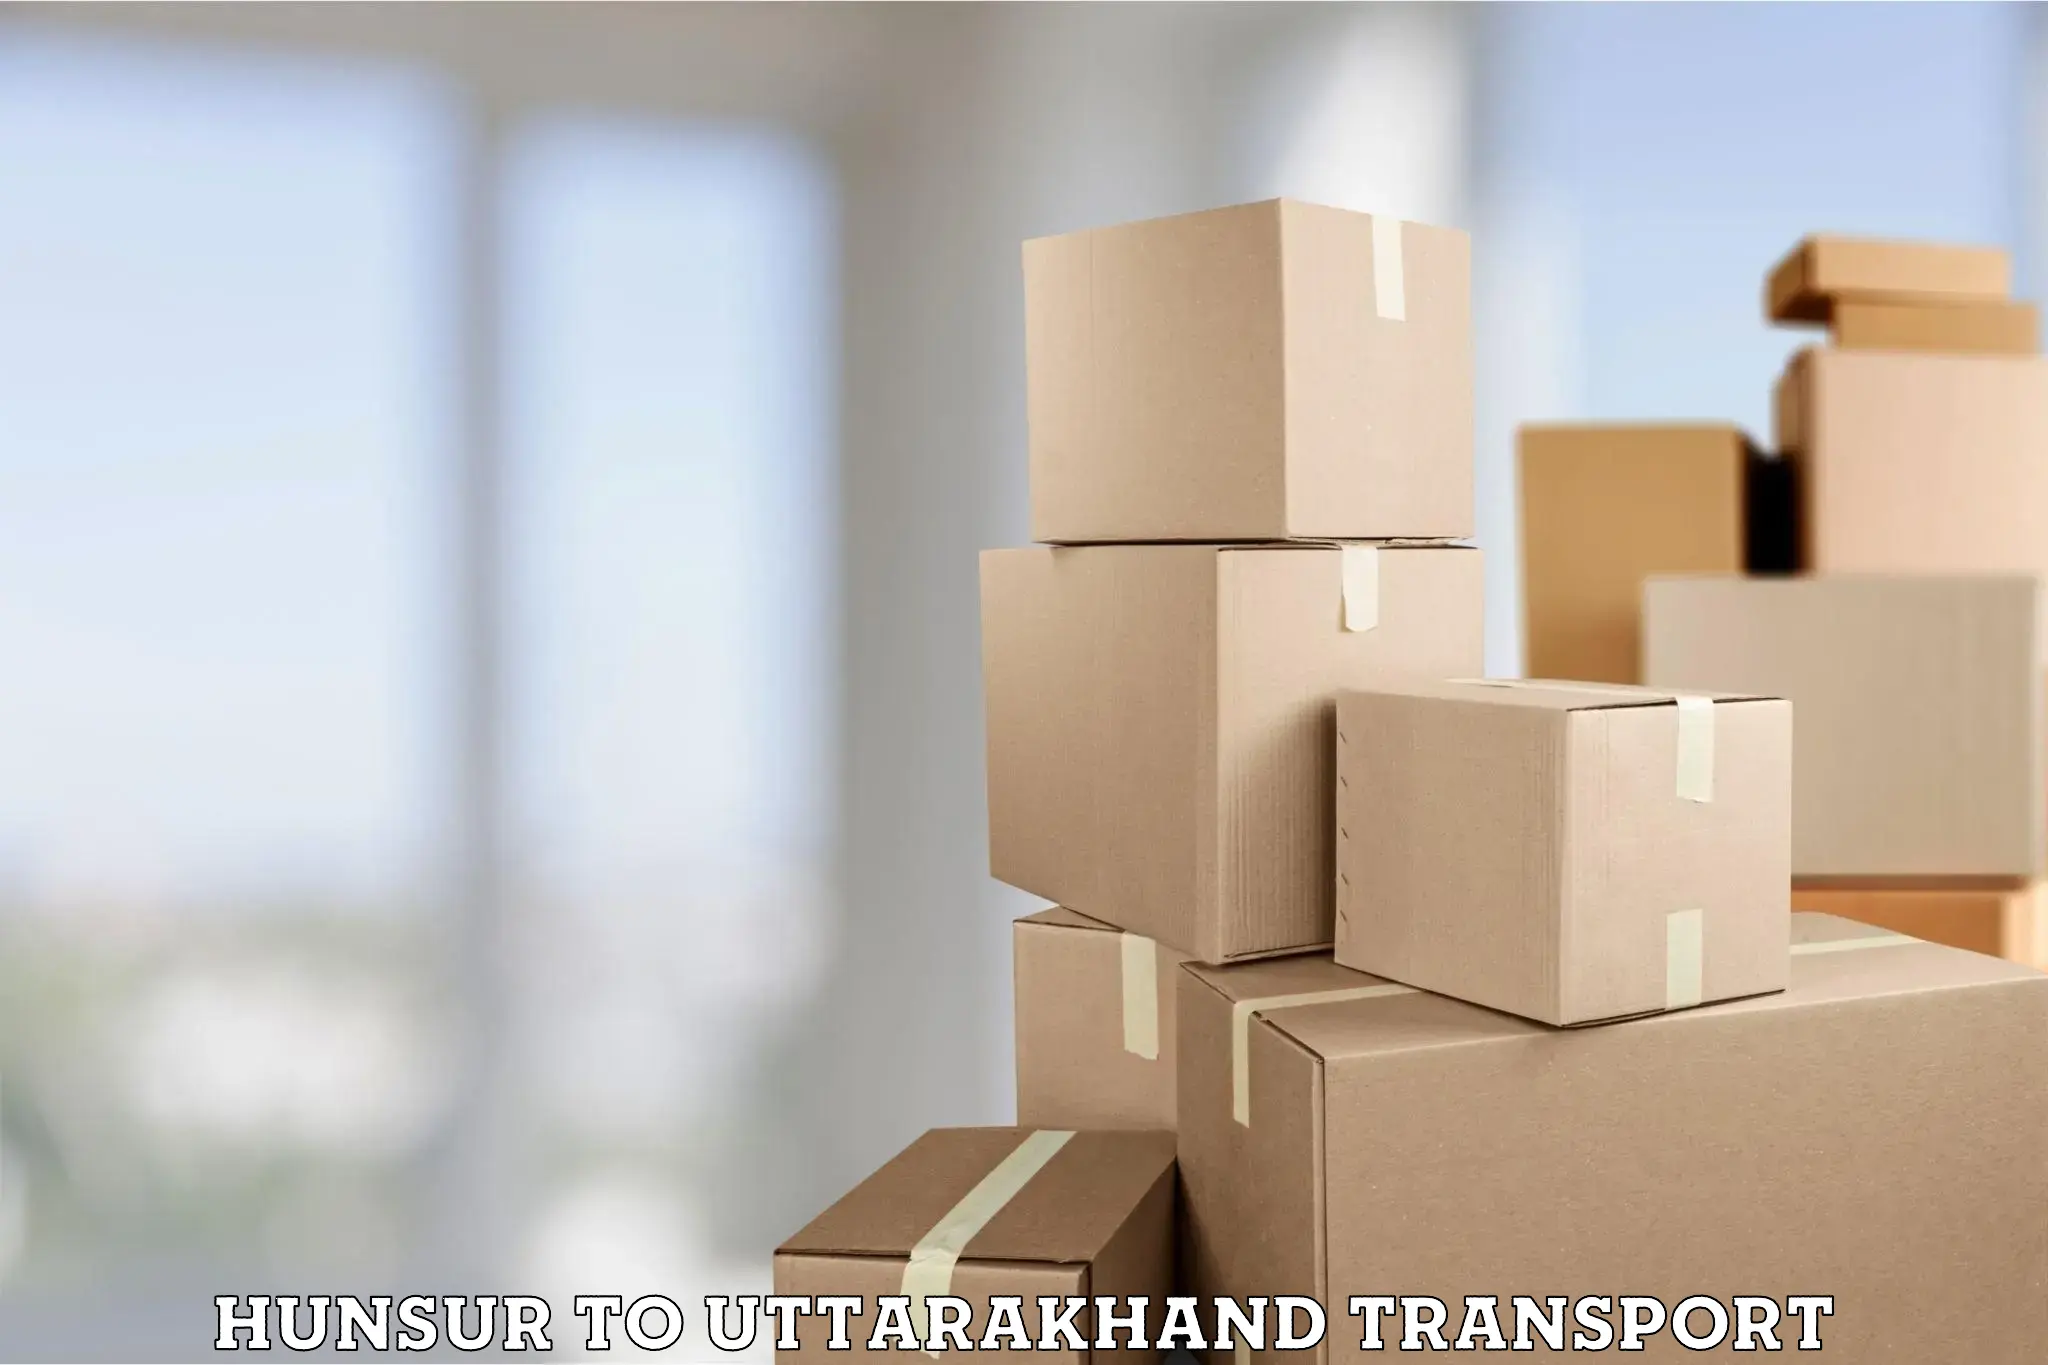 Container transport service Hunsur to Rudrapur